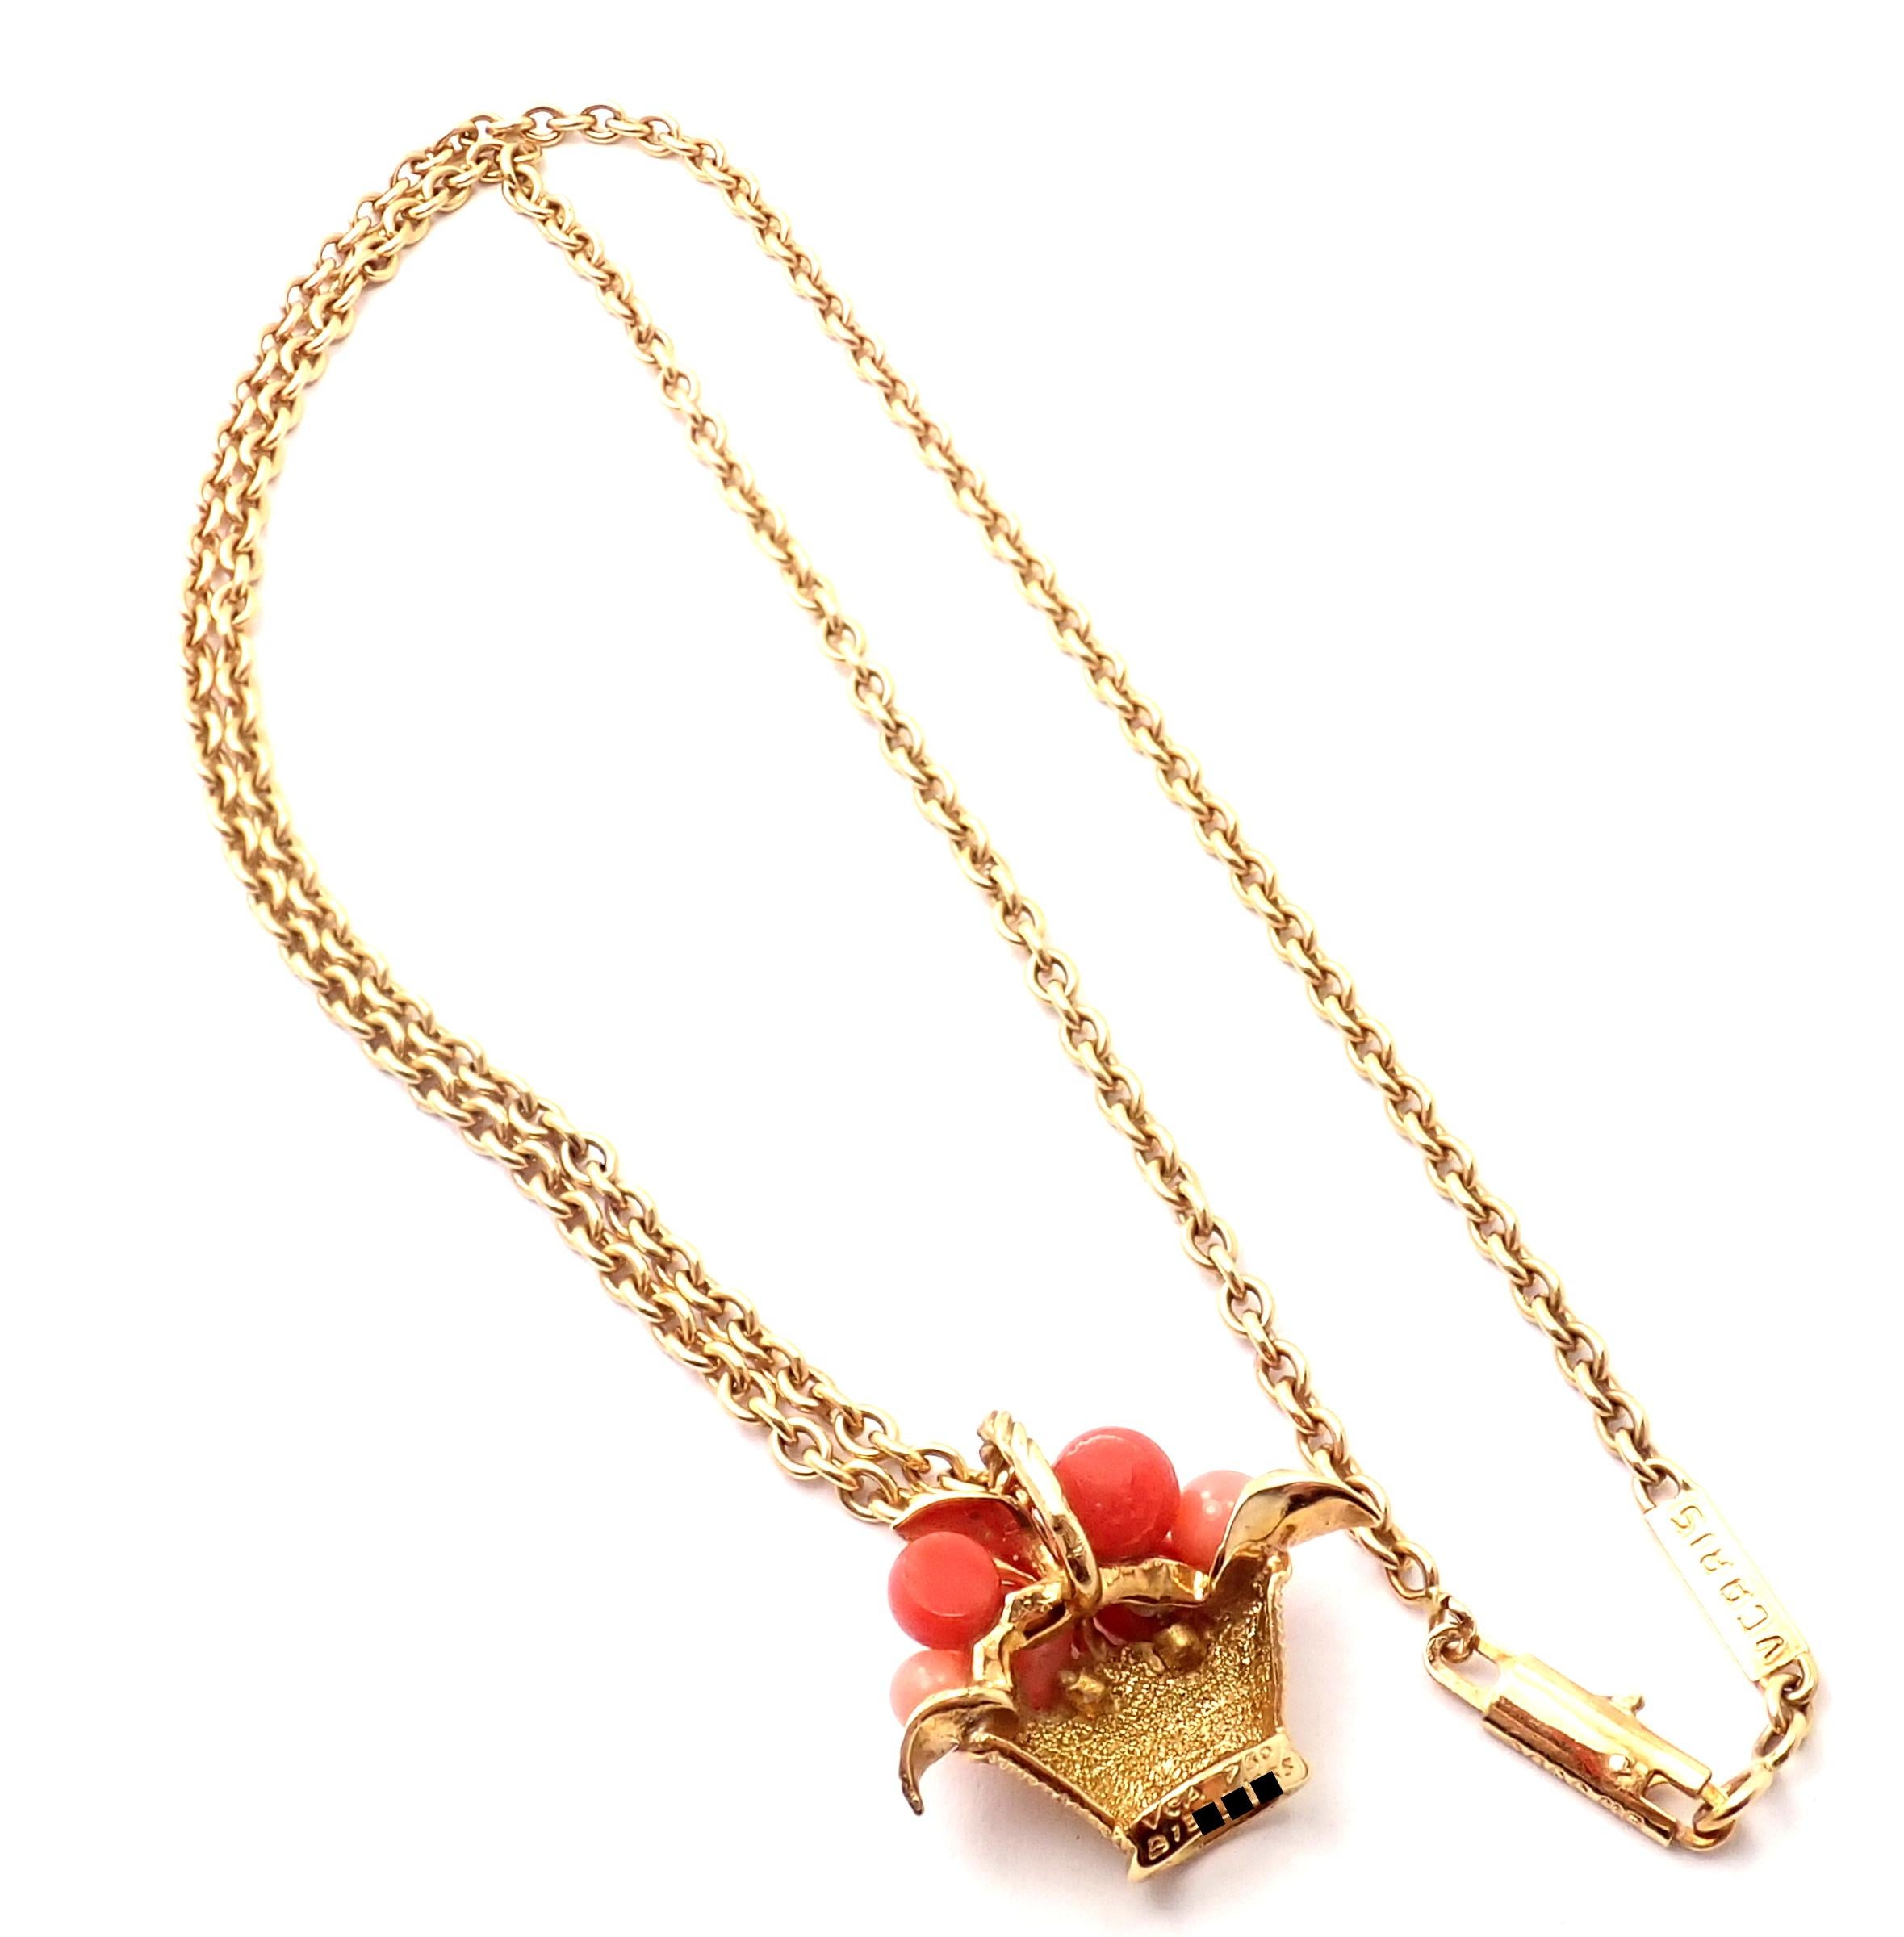 Van Cleef & Arpels Coral Bead Fruit Basket Yellow Gold Pendant Necklace For Sale 4